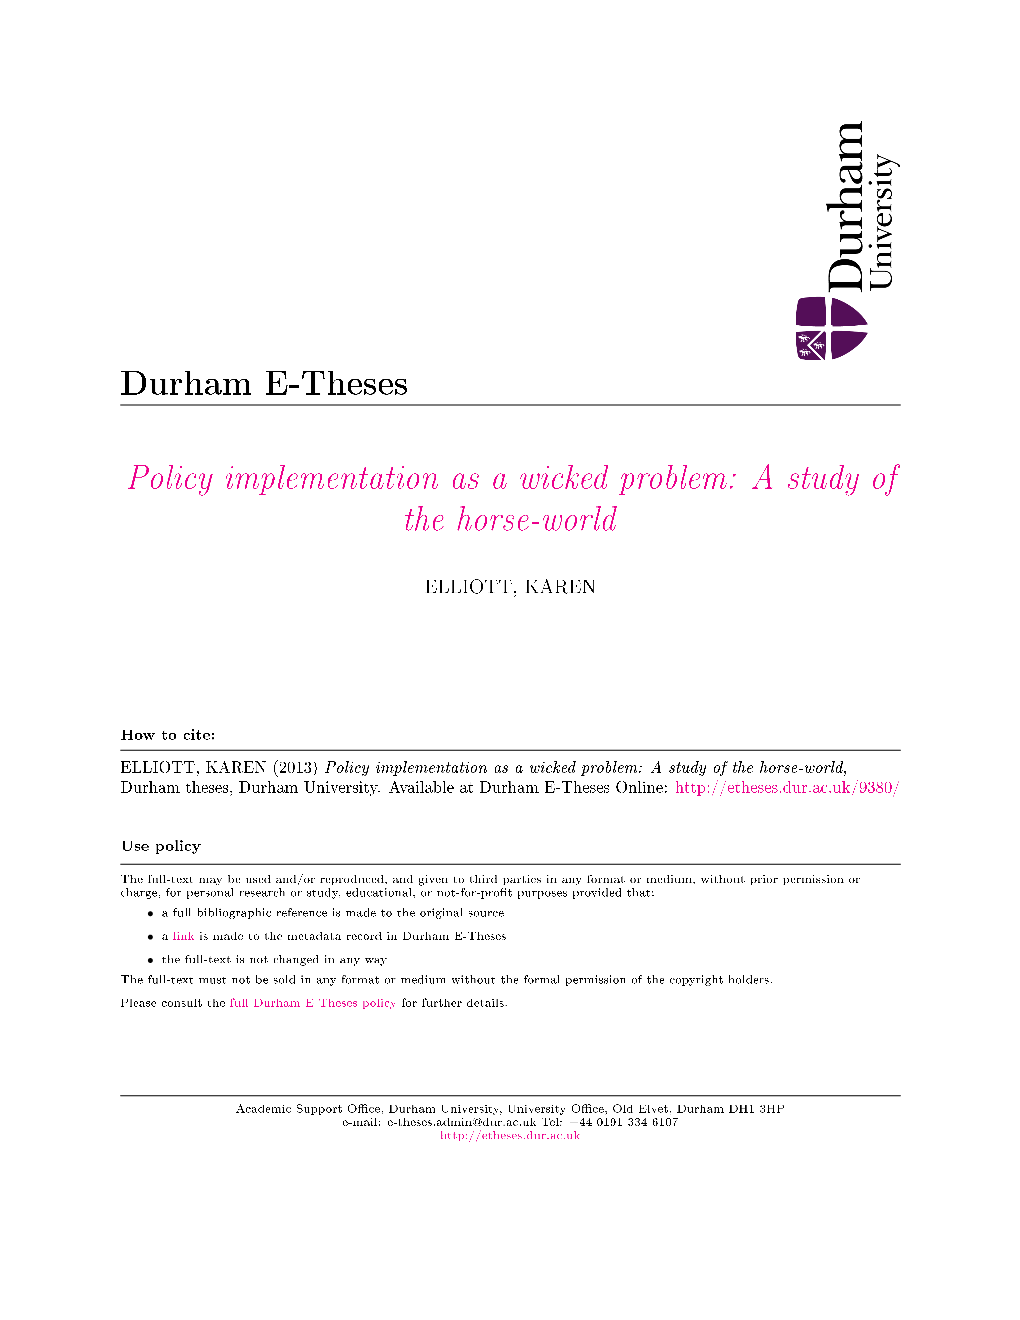 Policy Implementation As a Wicked Problem: a Study of the Horse-World